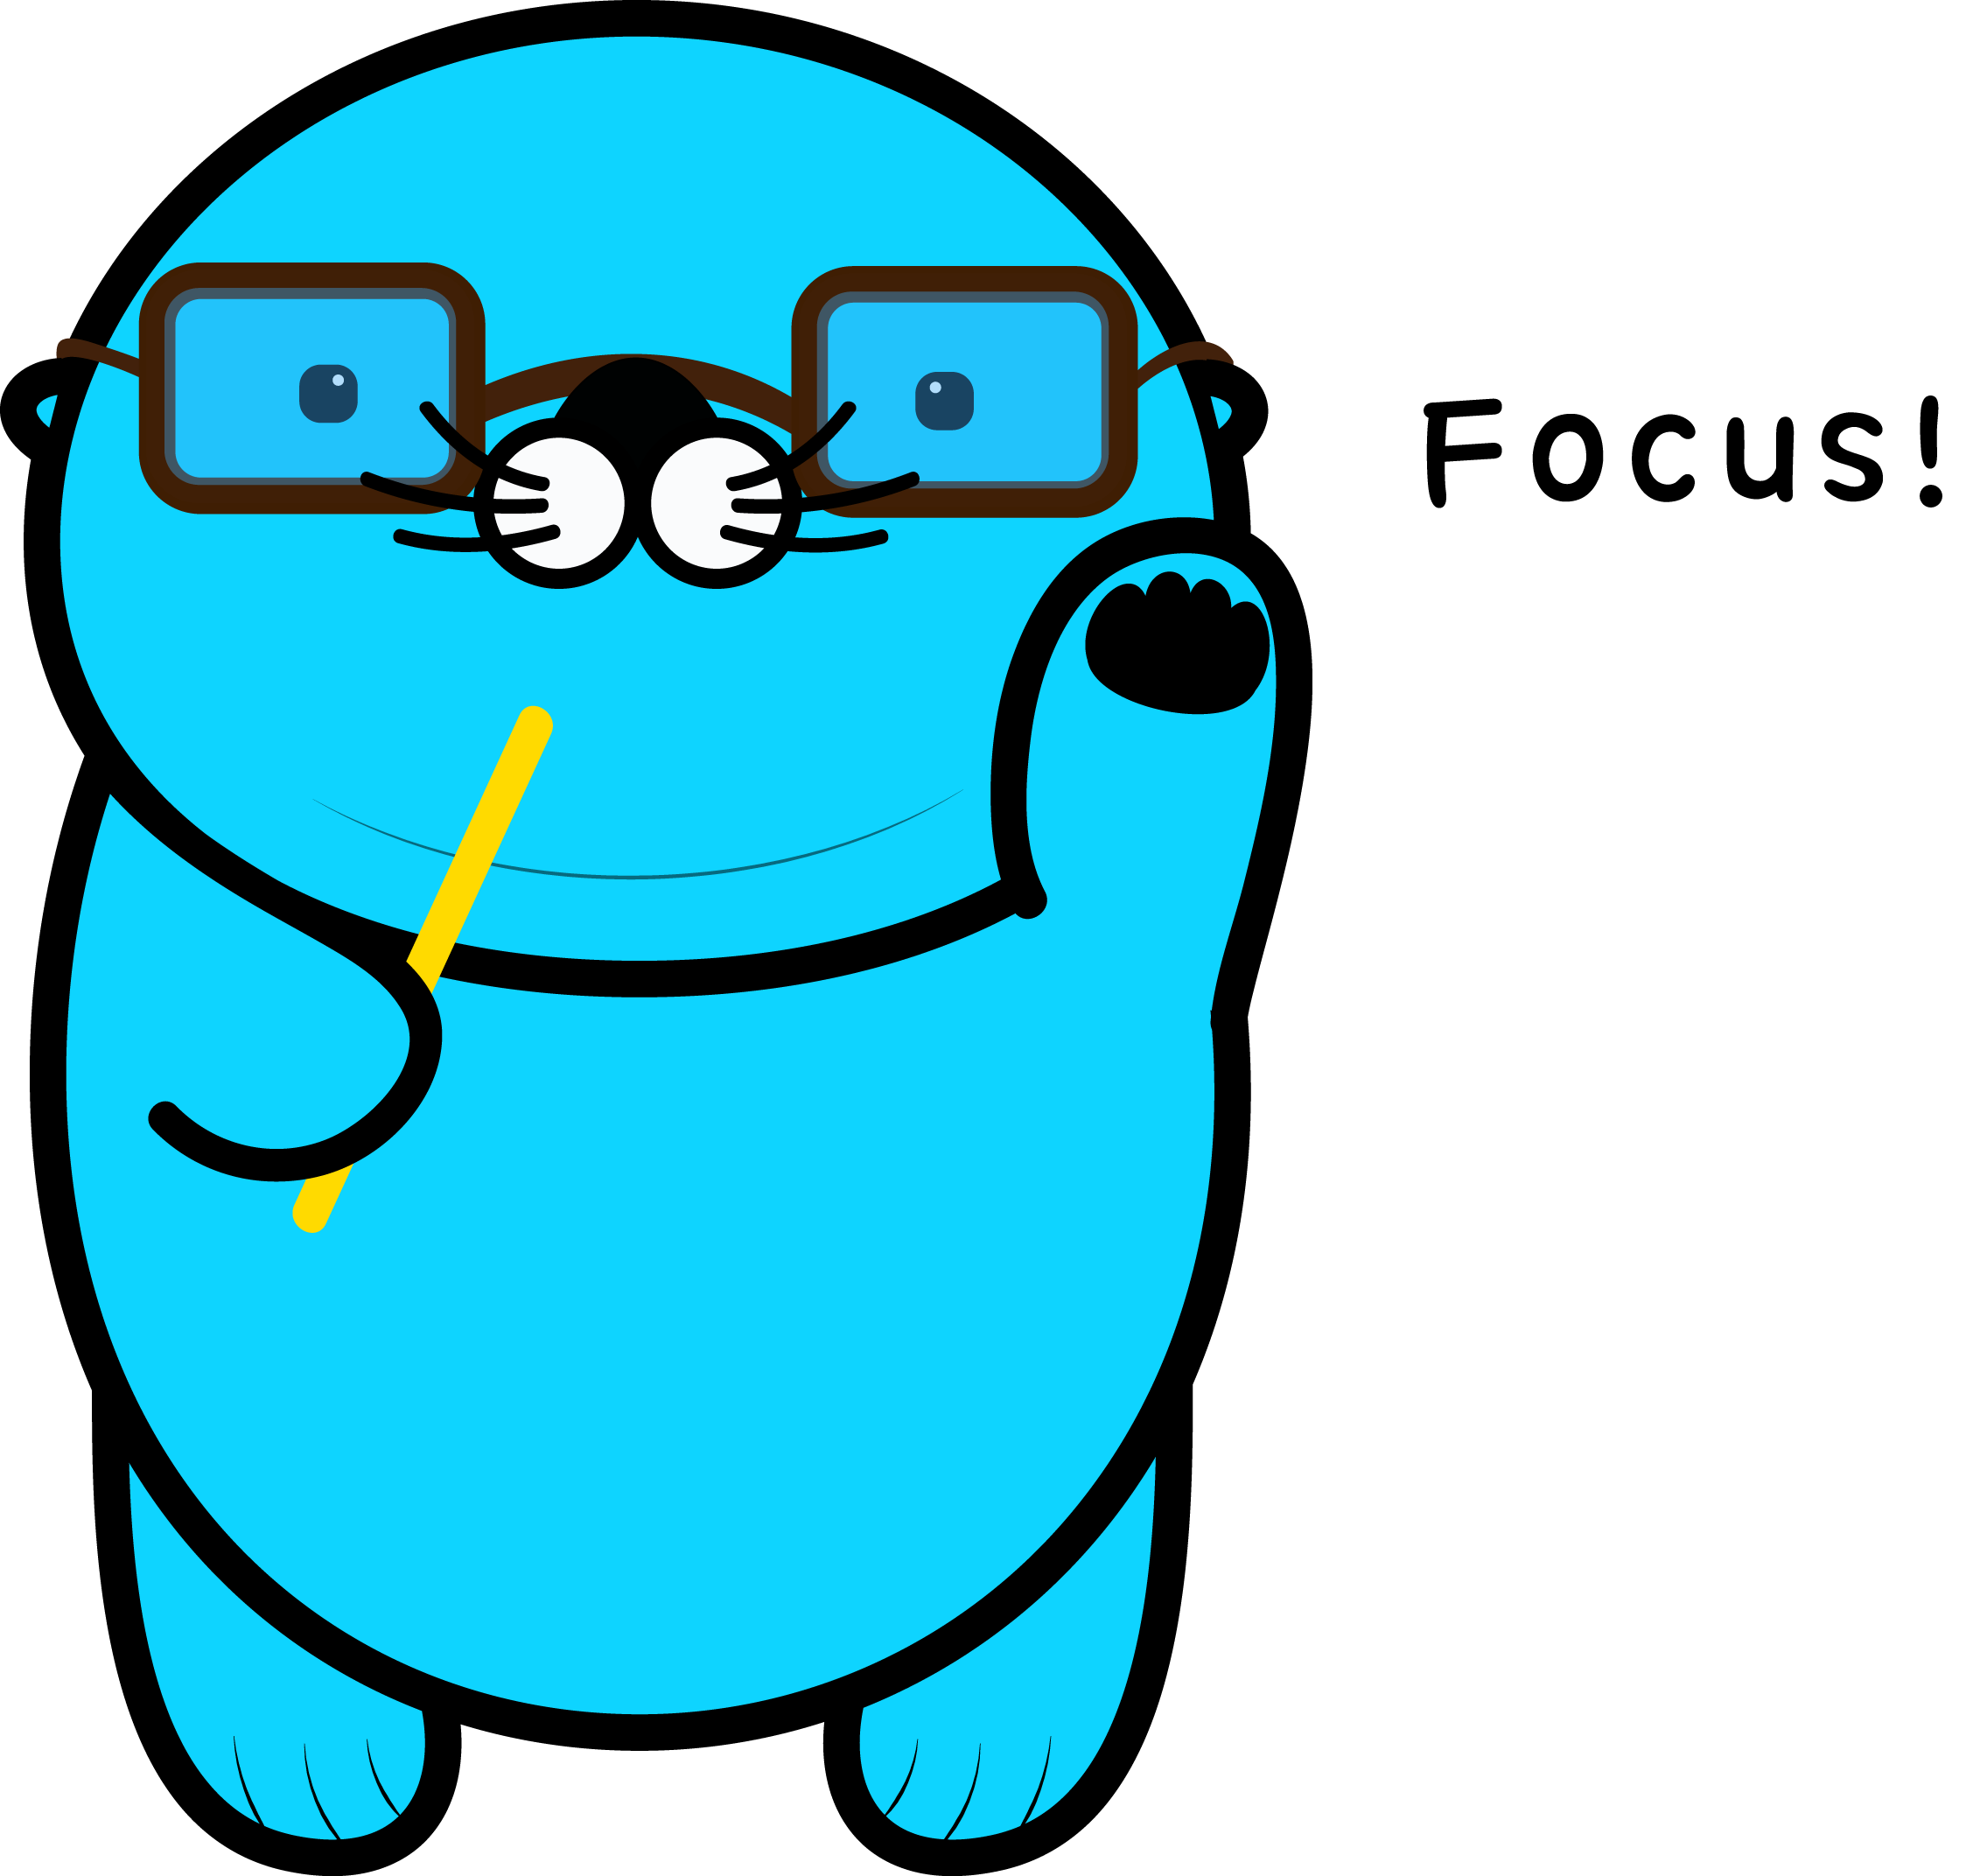 Richie, the mascot of Option Pool, is wearing glasses and holding a instruction stick in a hand while demanding your attention